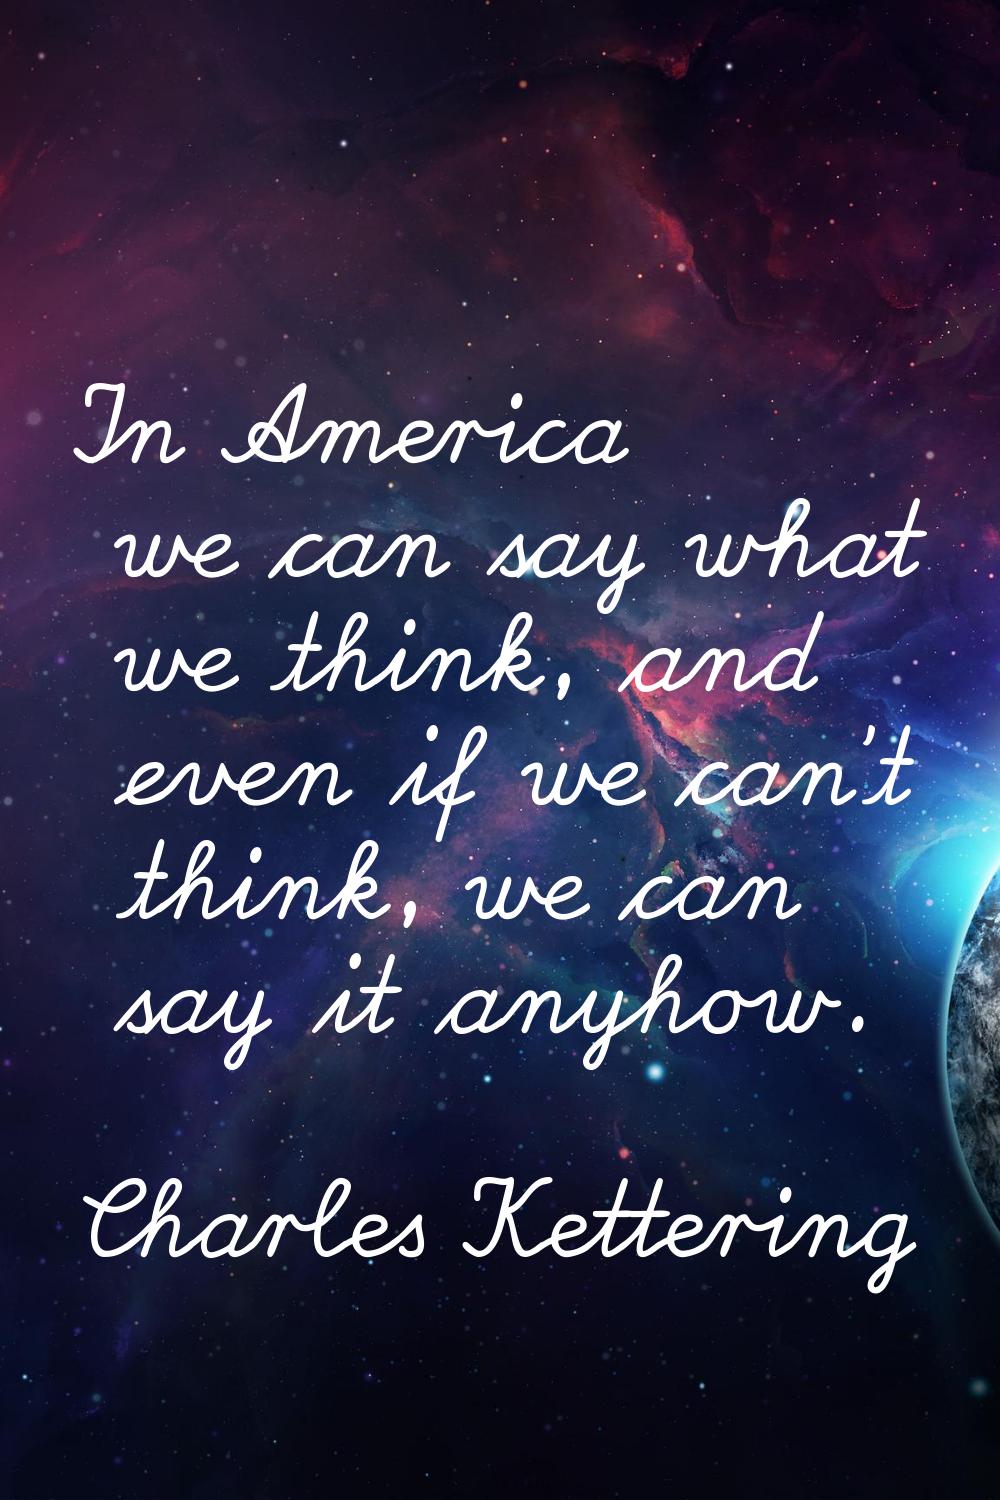 In America we can say what we think, and even if we can't think, we can say it anyhow.